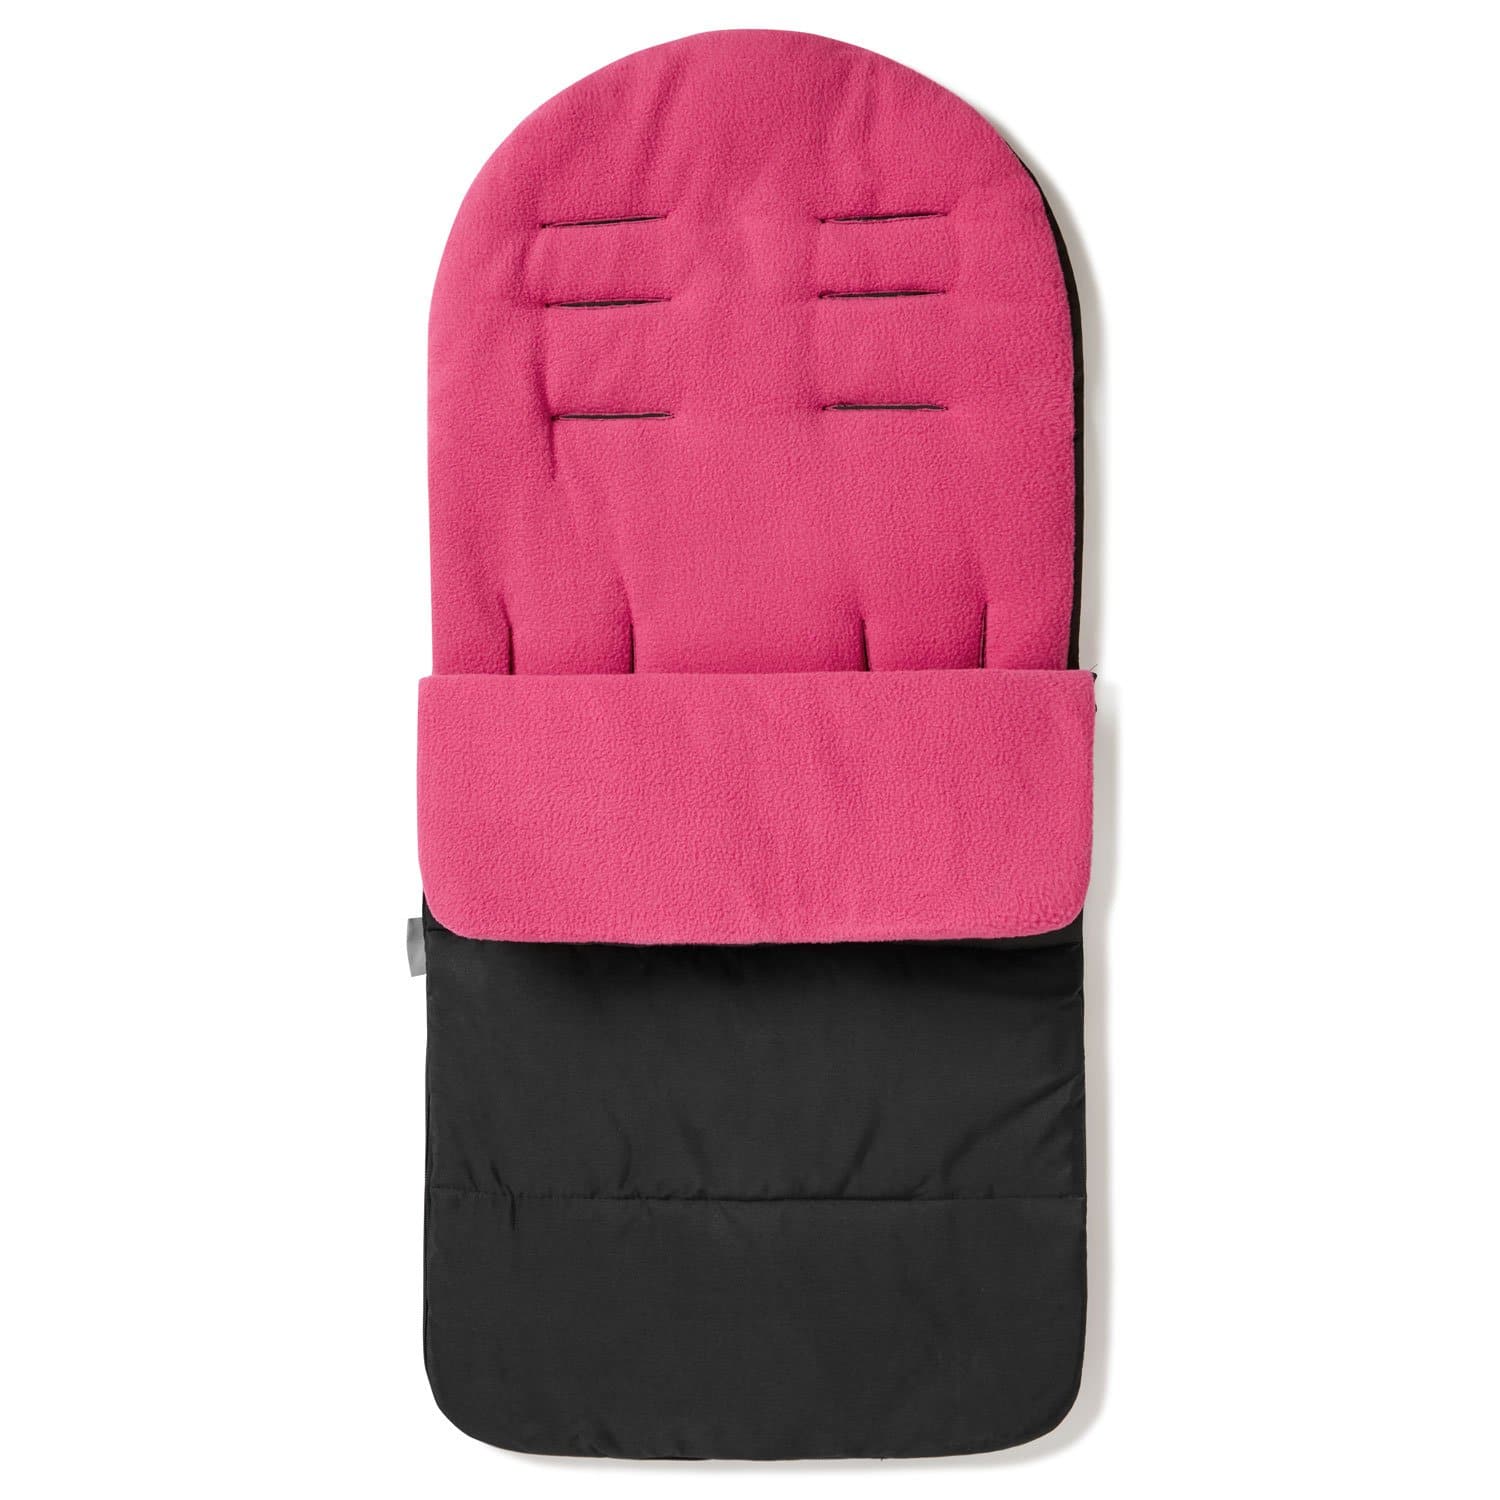 Premium Footmuff / Cosy Toes Compatible with Maxi Cosi - For Your Little One